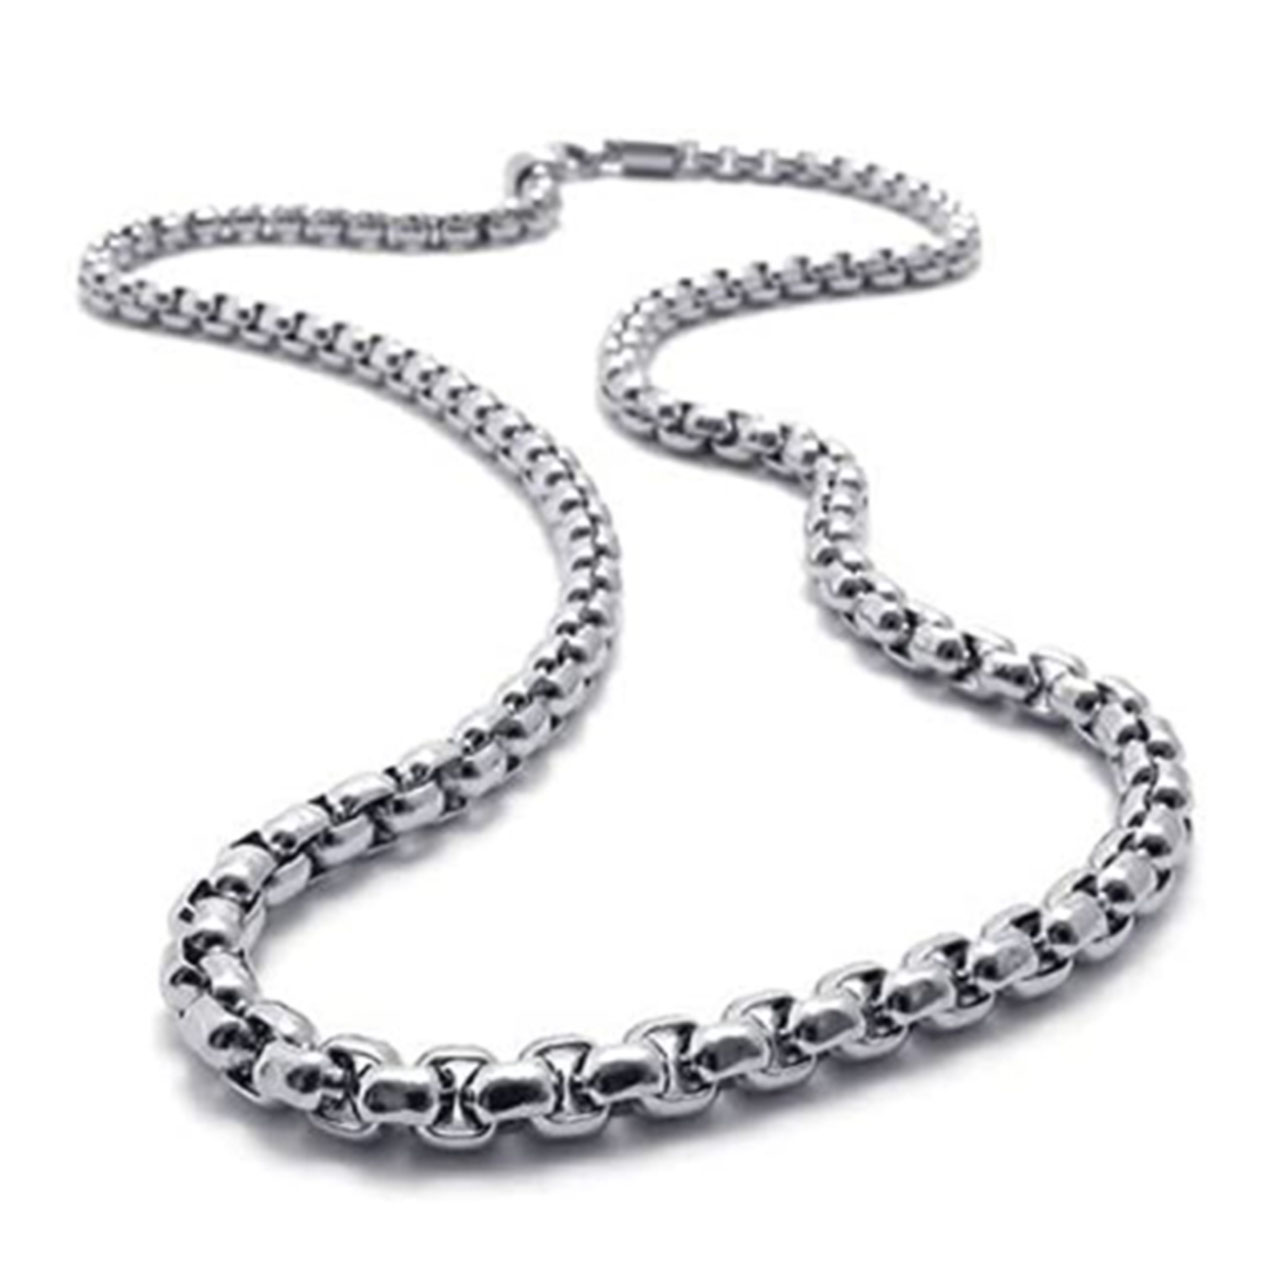 Men's 5.0mm Foxtail Chain Necklace in Stainless Steel and Blue IP - 22